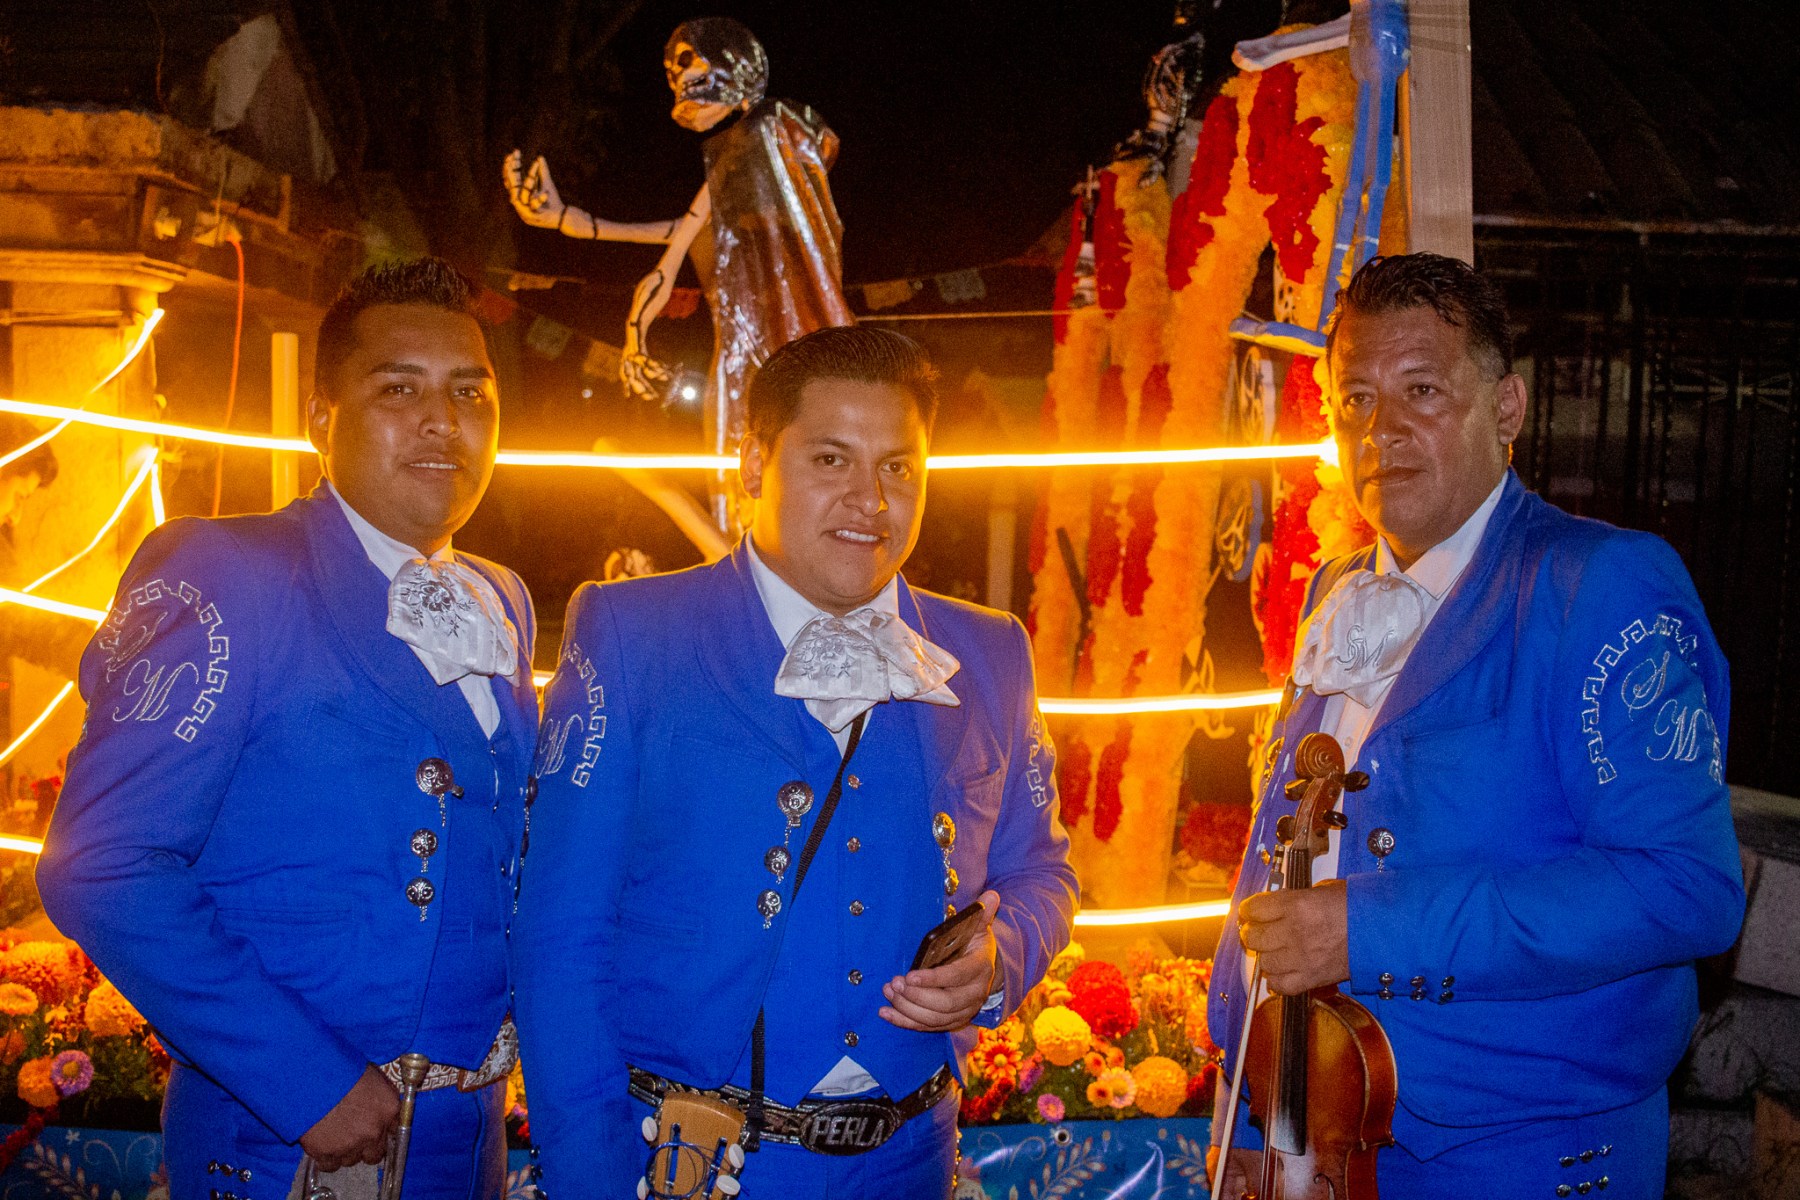 On the night of November 1st, the cemetery turns into a literal party, with relatives gathering to celebrate the lives of the deceased. Live music, such as that of these mariachis, is quite prevalent, as are <em>chelas</em>, aka beers.